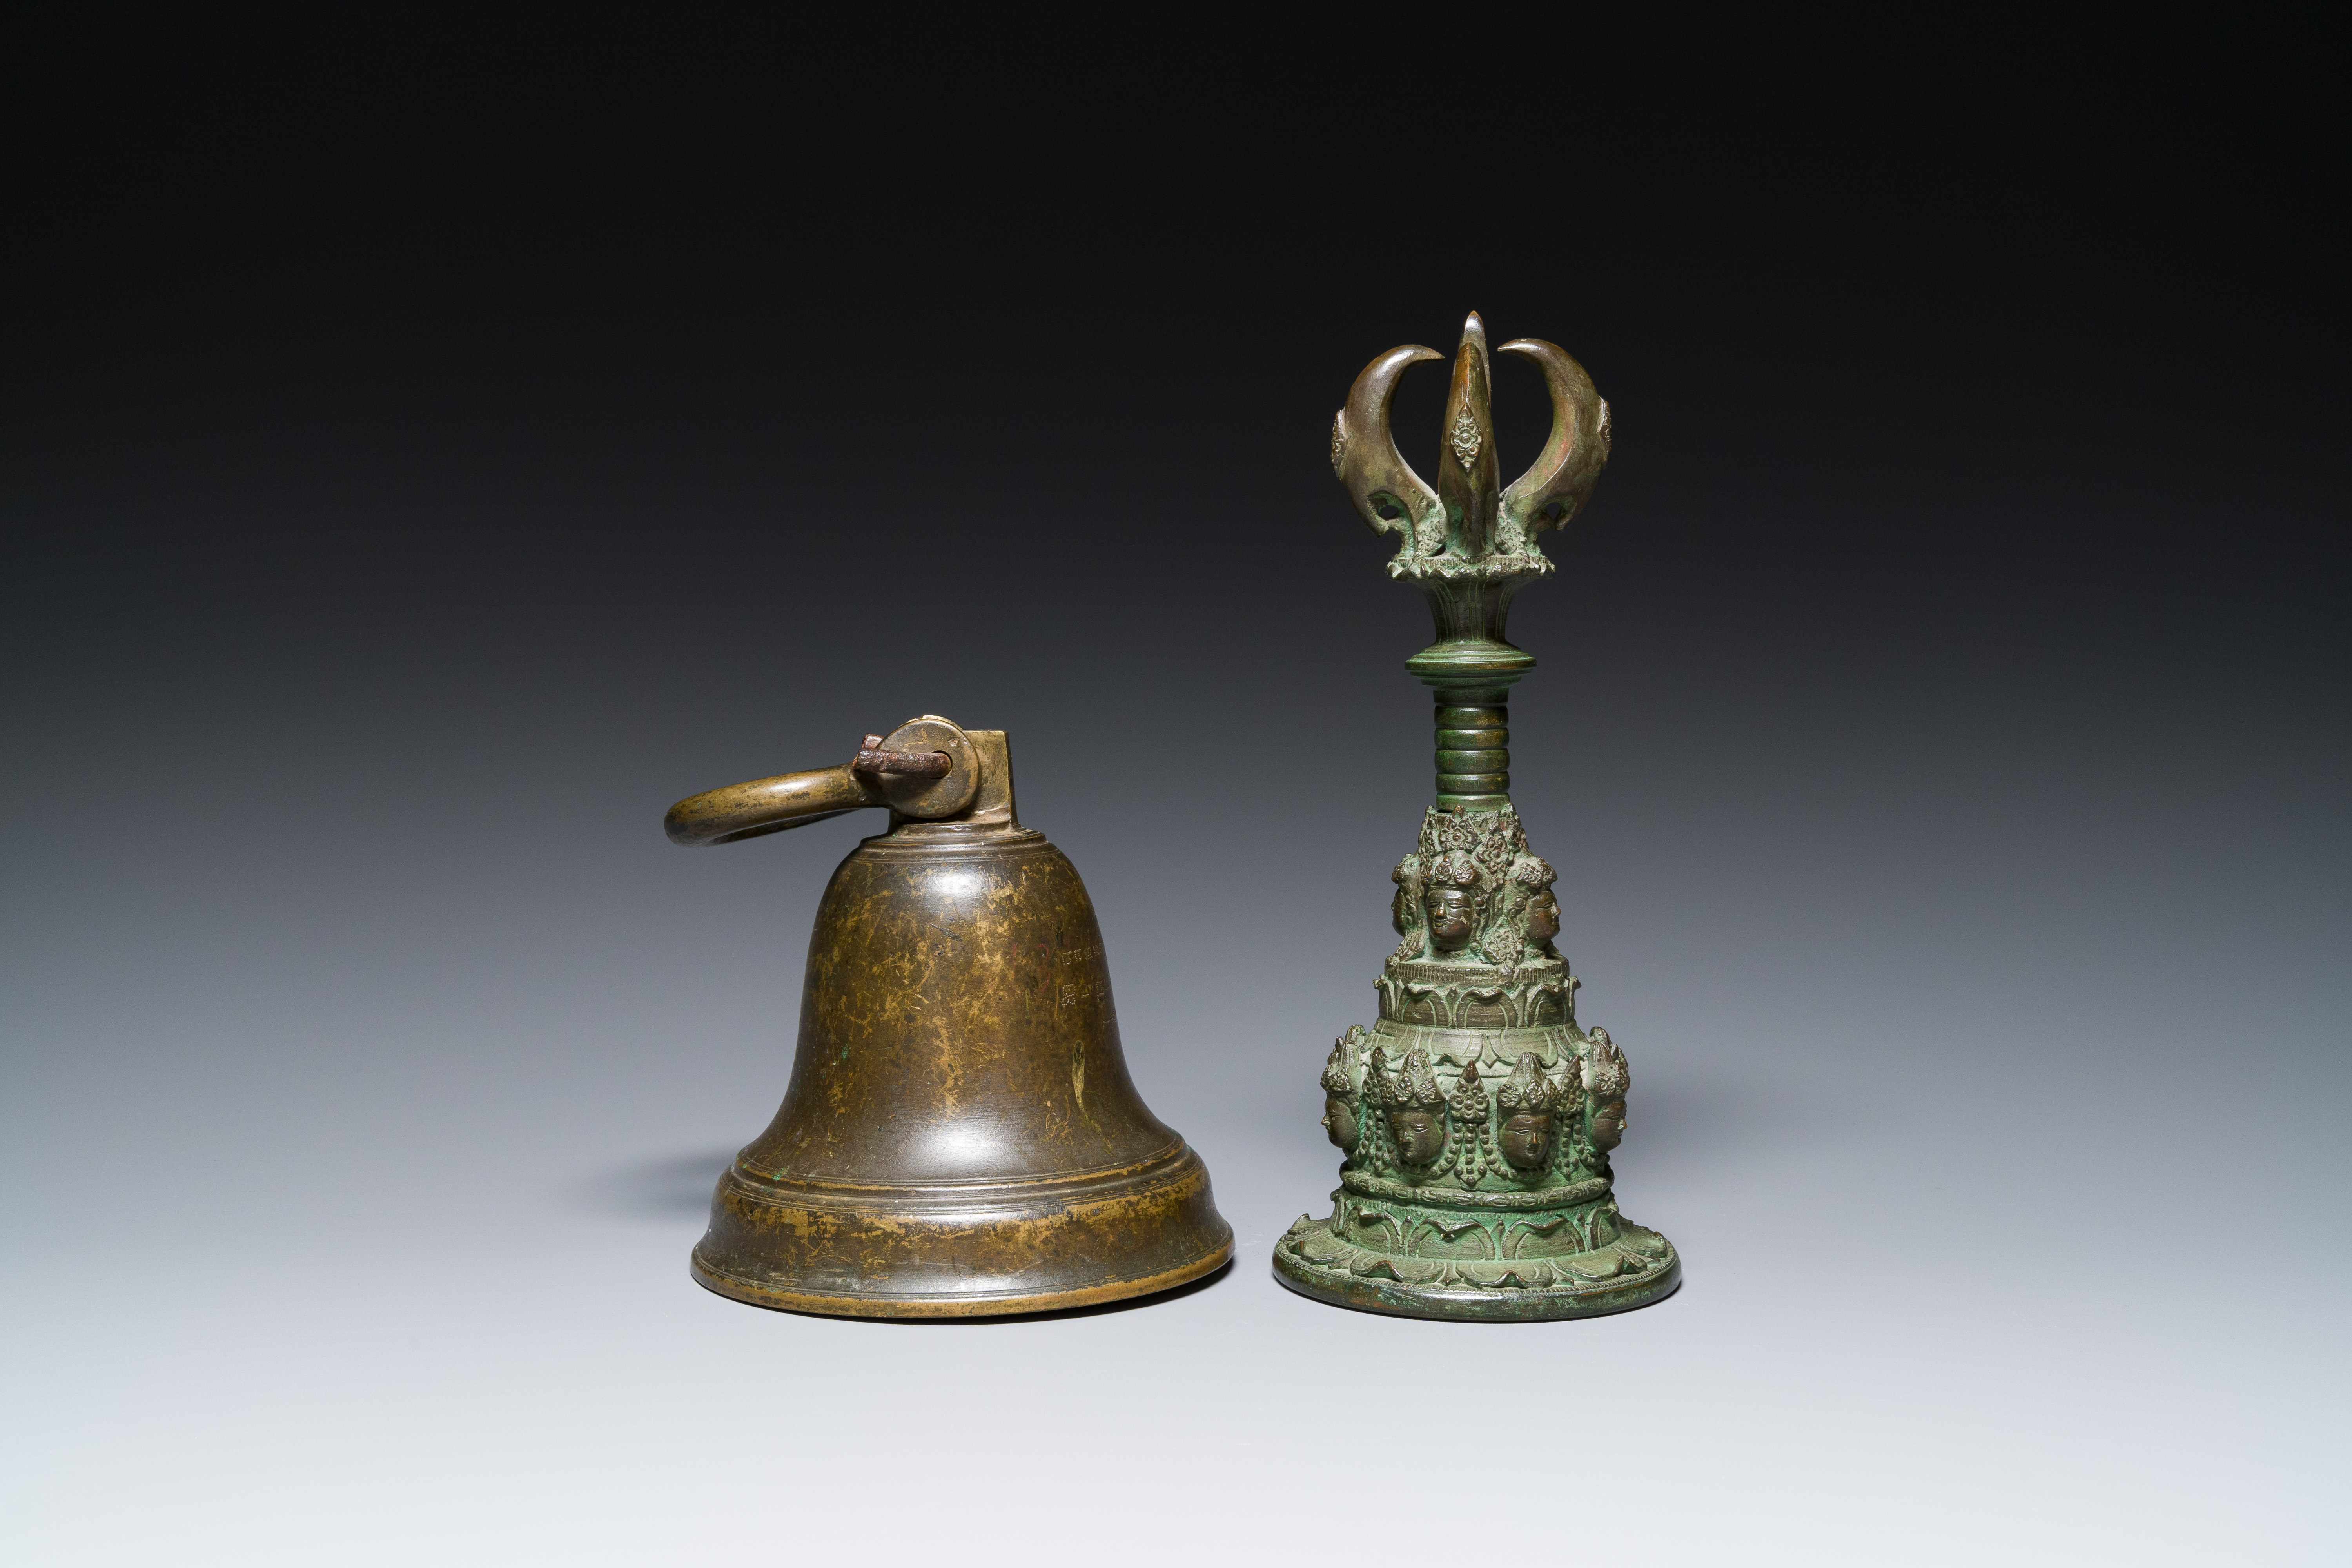 A bronze bell and a ceremonial hand bell, South Asia and Southeast Asia, 19th C. or earlier - Image 8 of 21